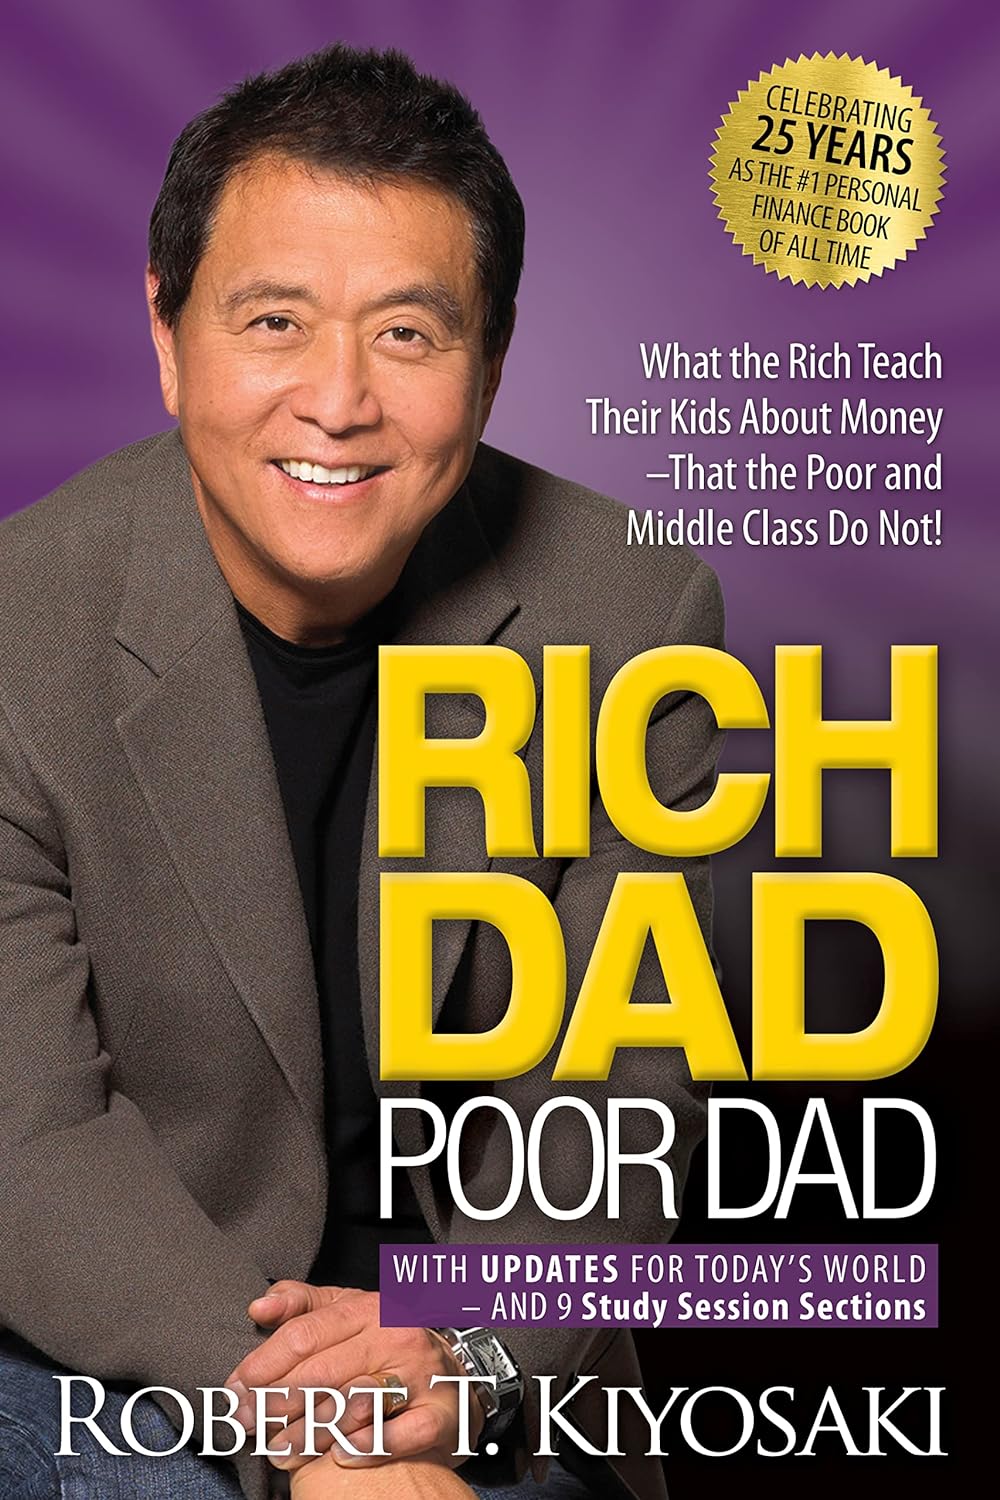 Rich Dad Poor Dad: What the Rich Teach Their Kids About Money That the Poor and Middle Class Do Not! (paperback) Robert T. Kiyosaki